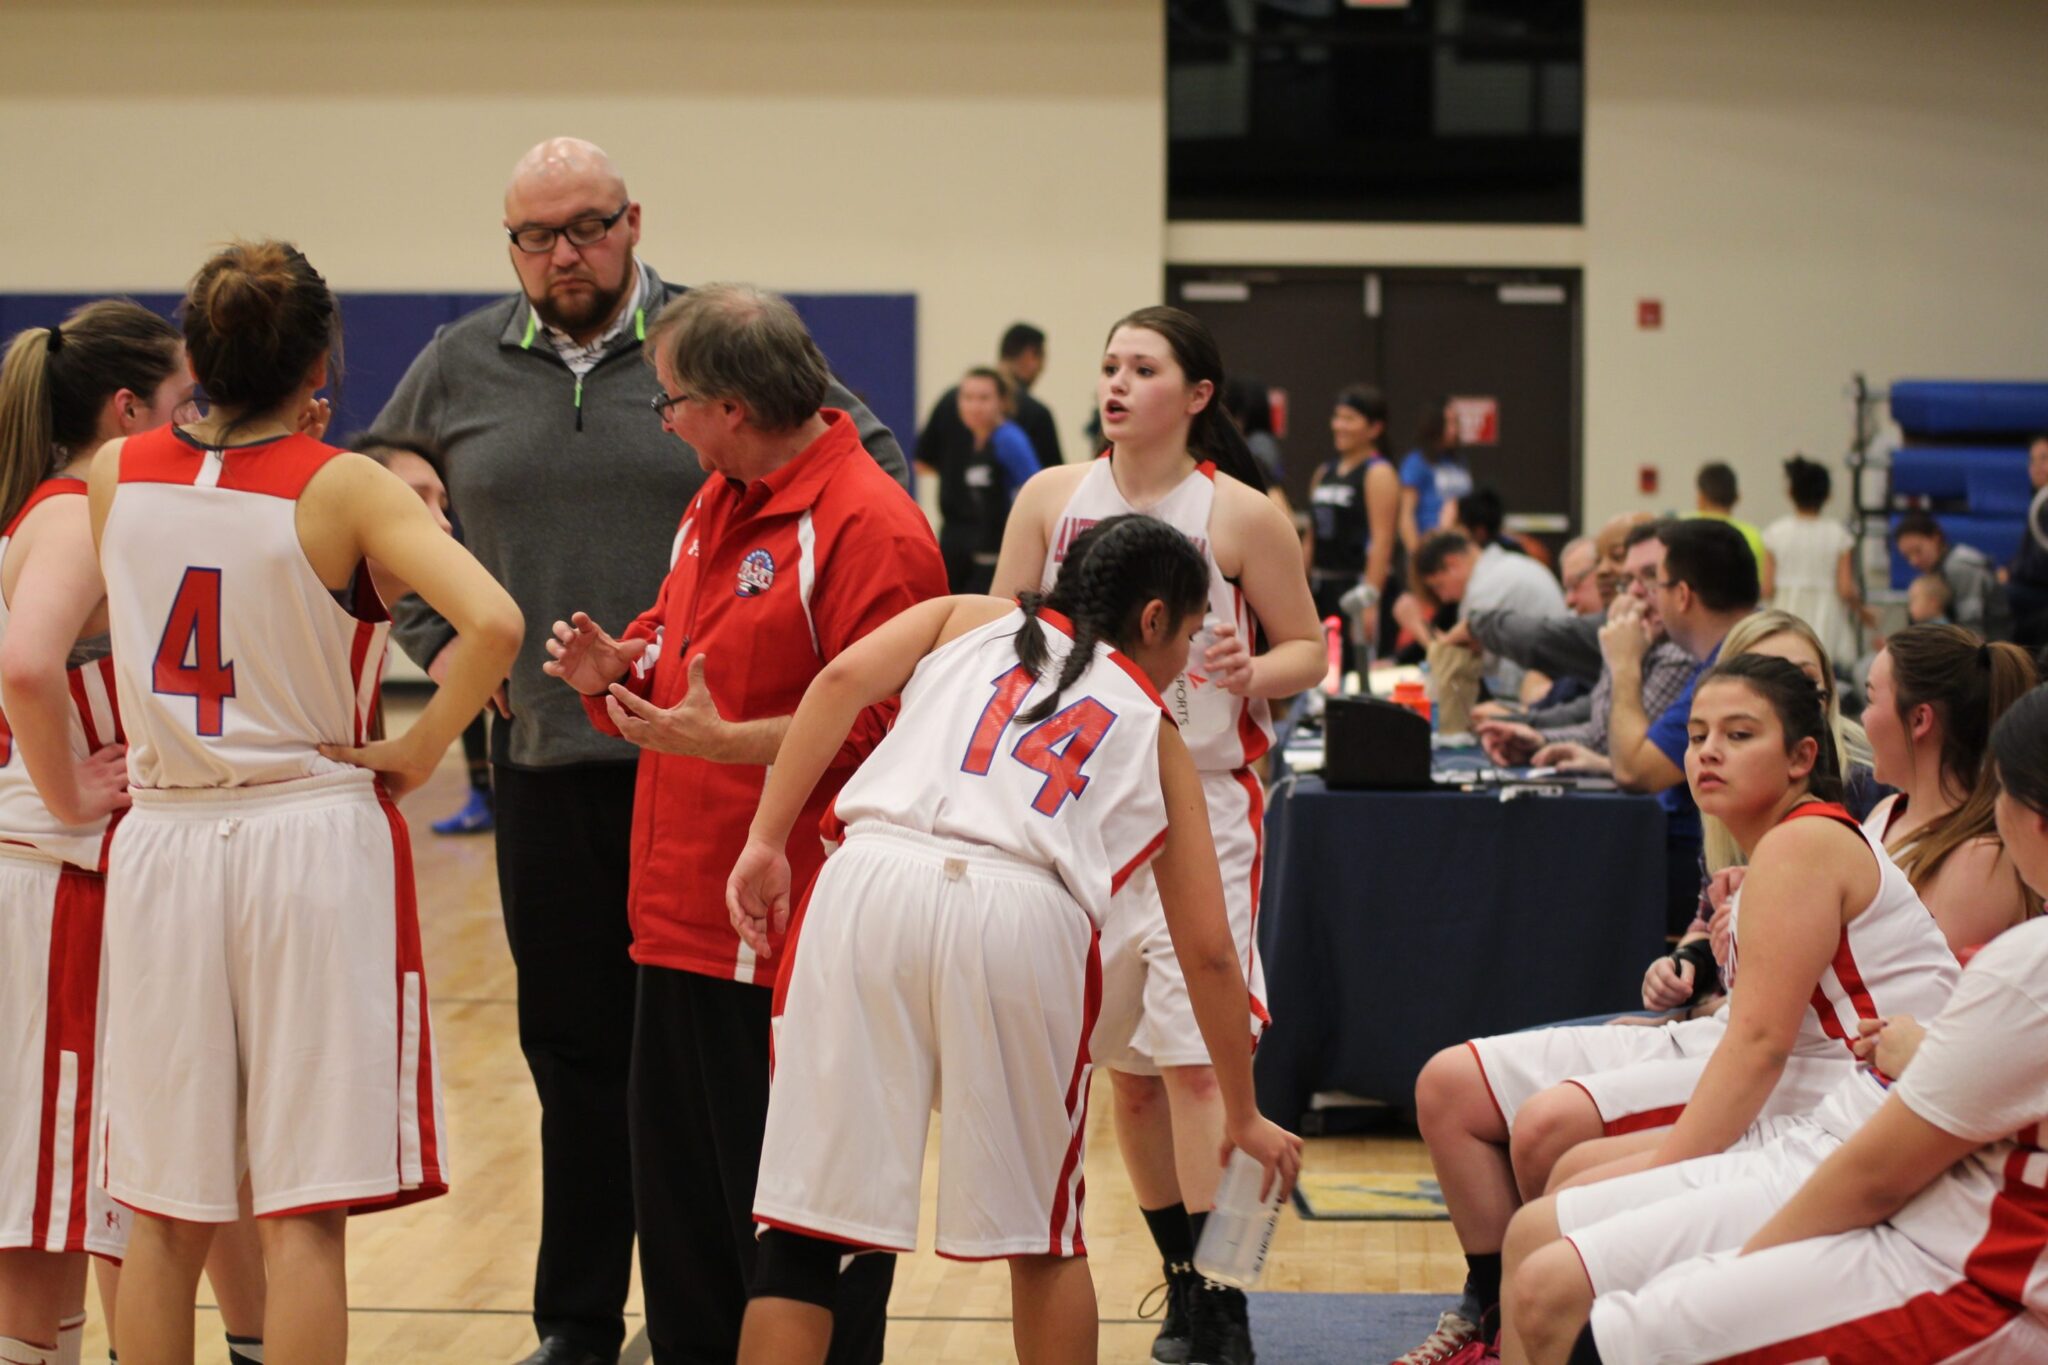 The women's basketball team huddling during a timeout.